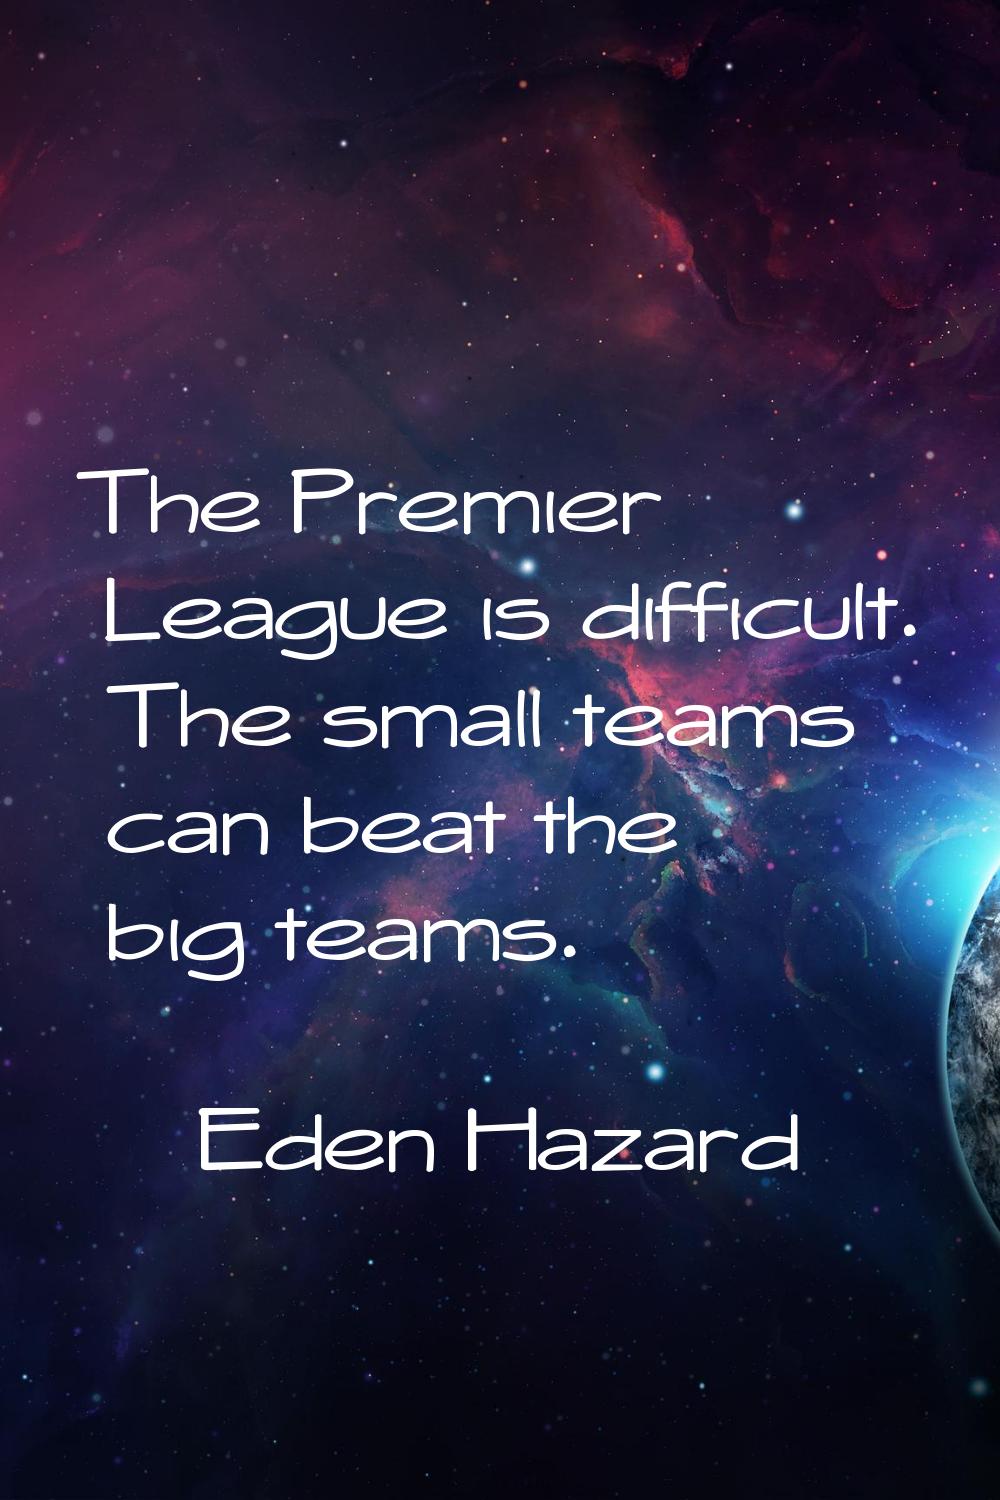 The Premier League is difficult. The small teams can beat the big teams.